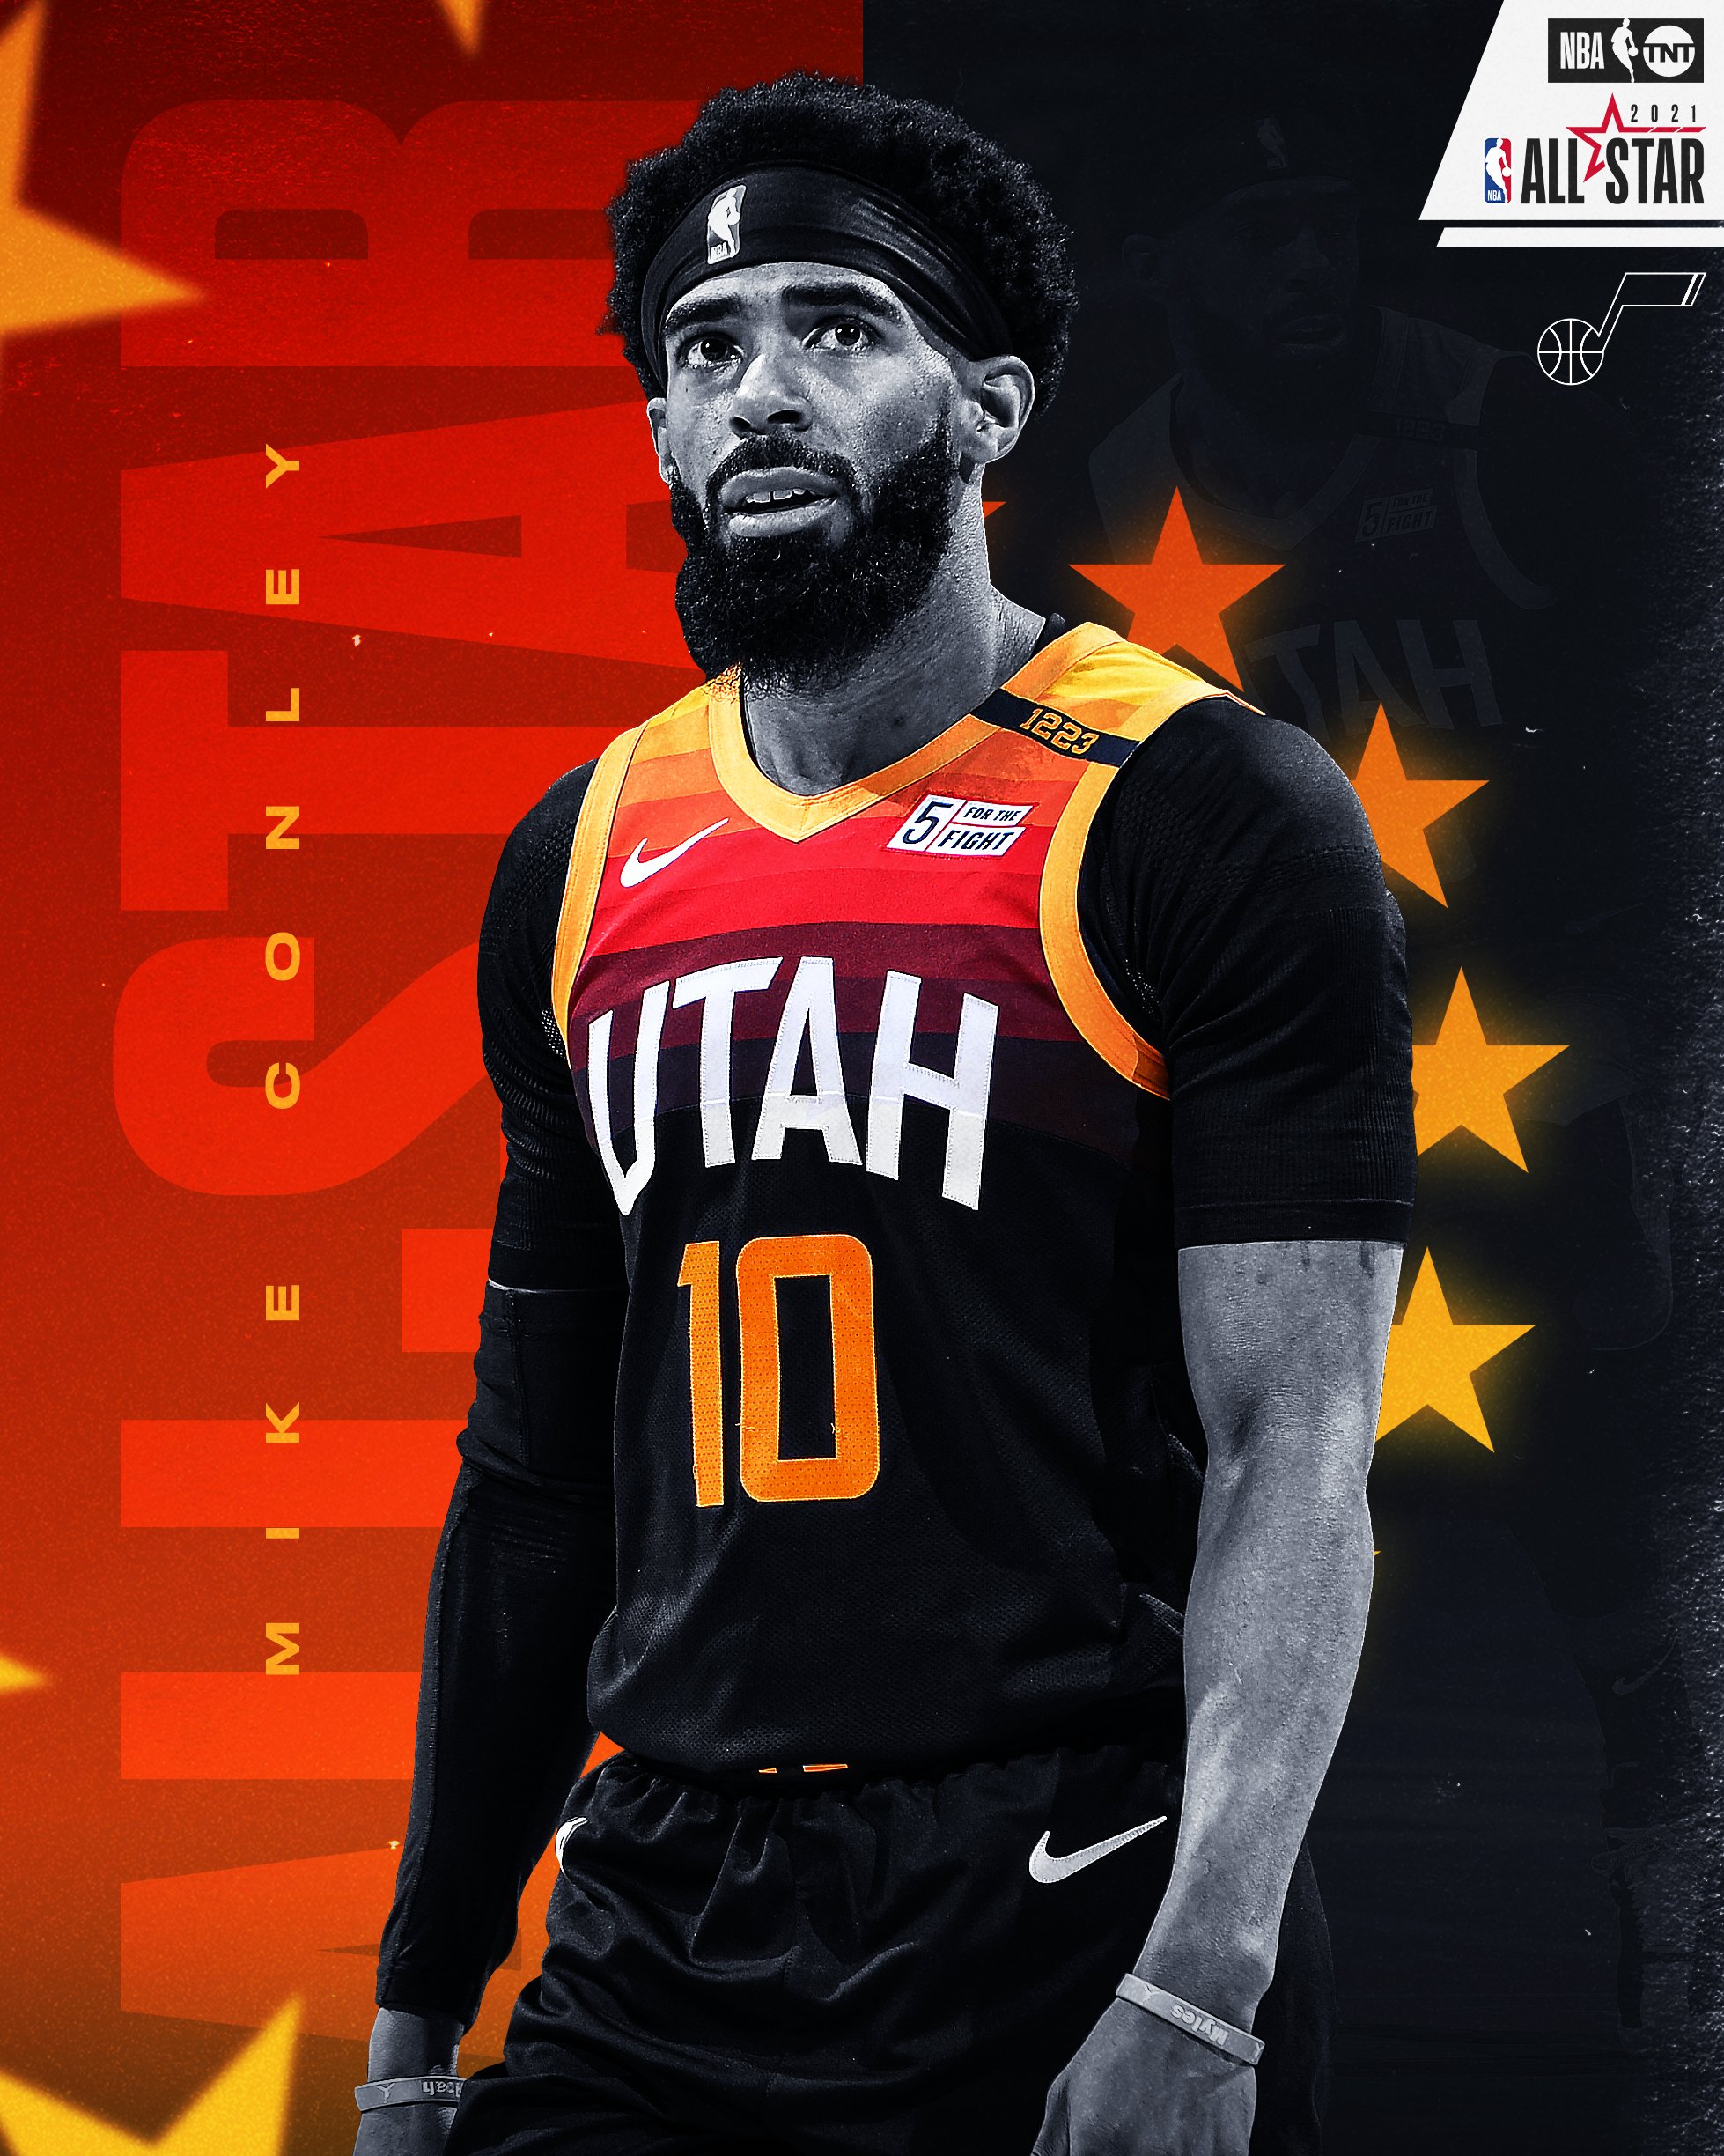 Mike Conley Wallpapers